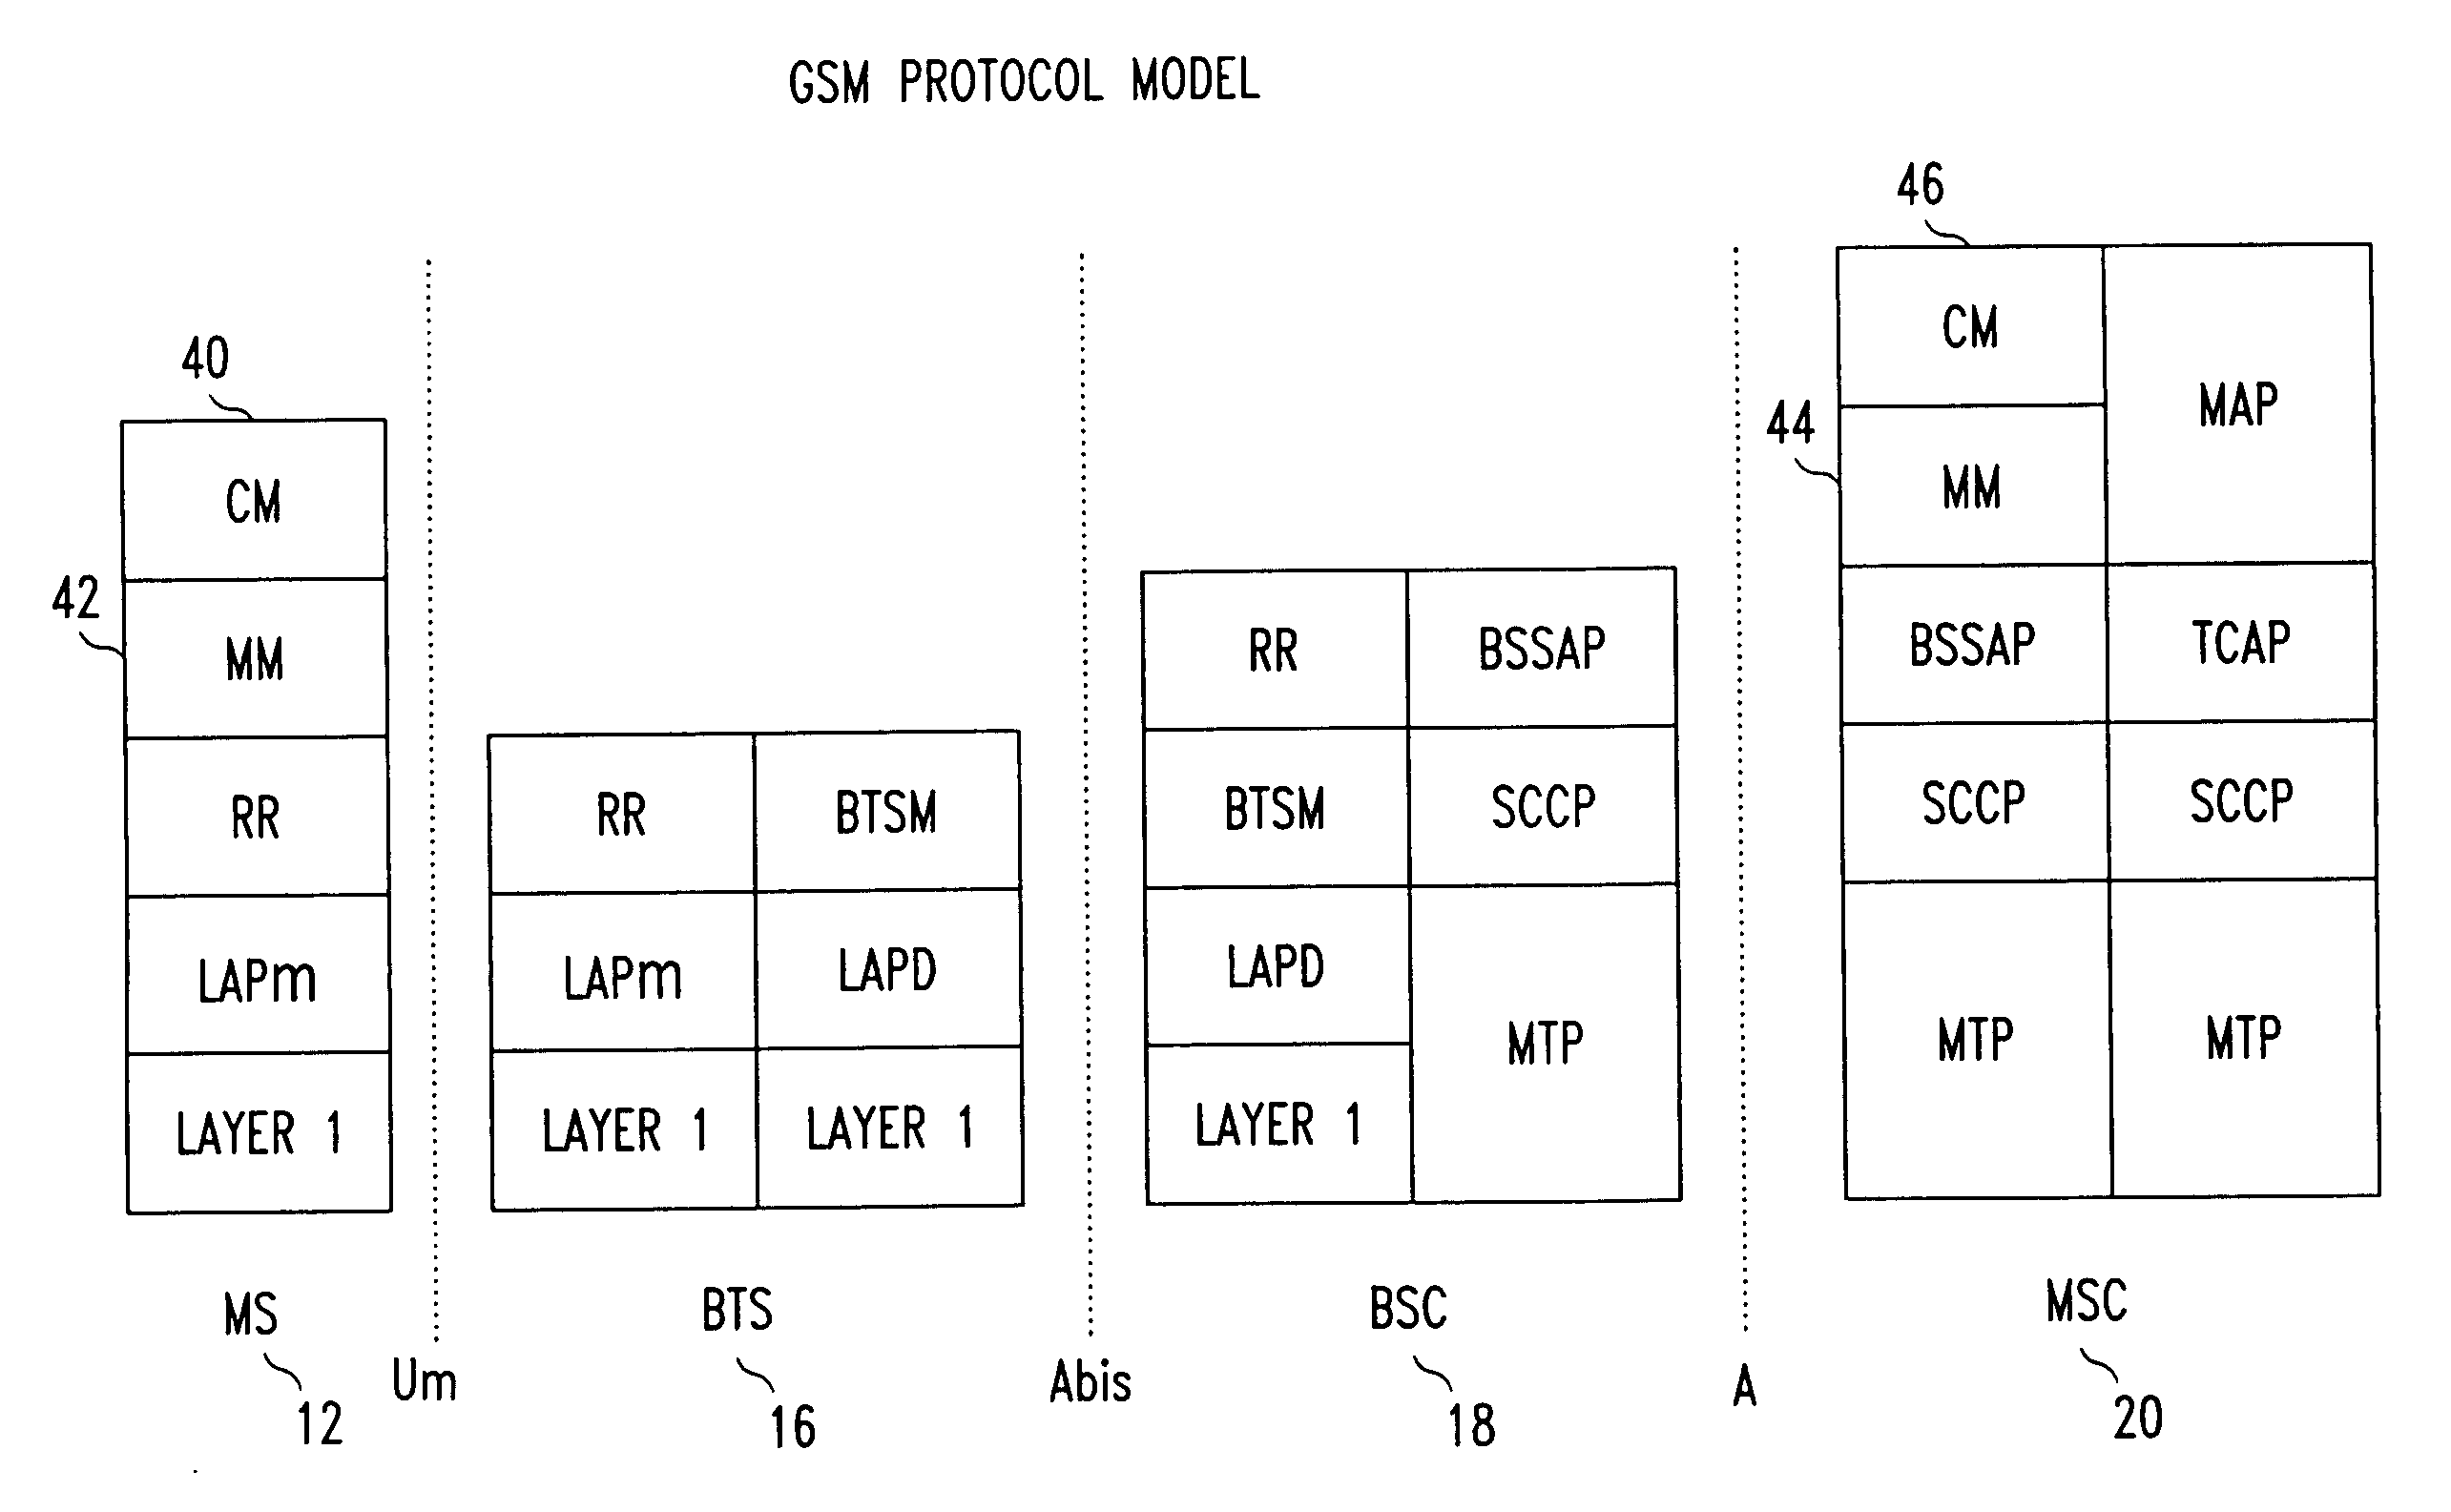 Enhanced 911 system for providing witness identification in a wireless communication system